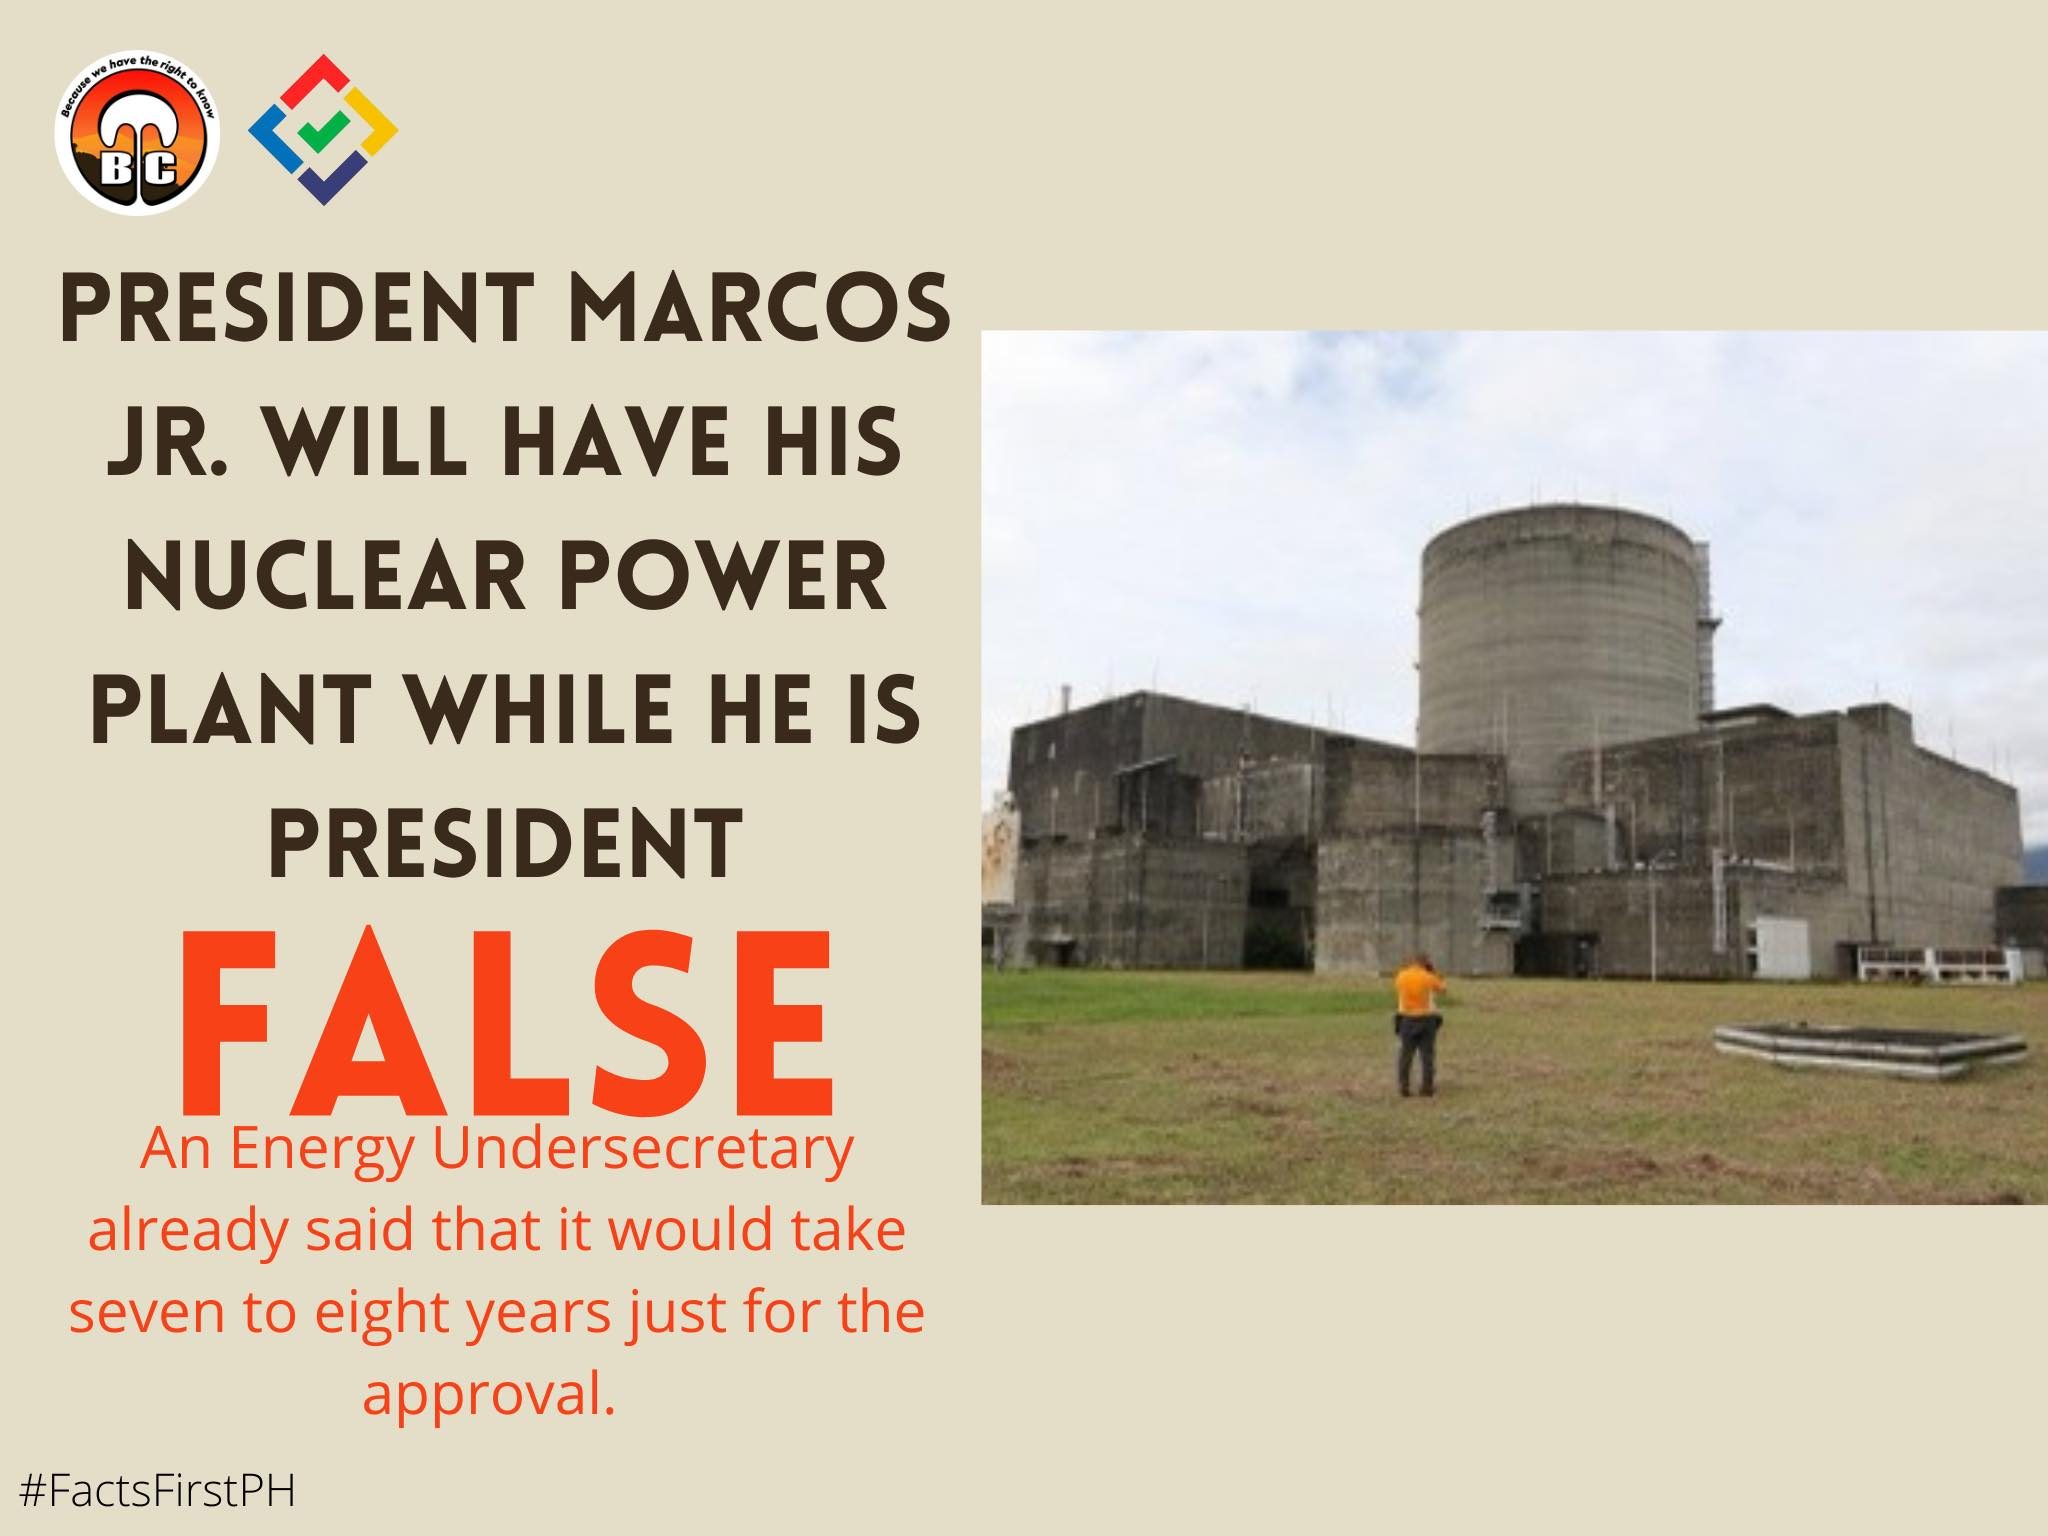 FACT CHECK – President Marcos Jr. will have his nuclear power plant while he is president